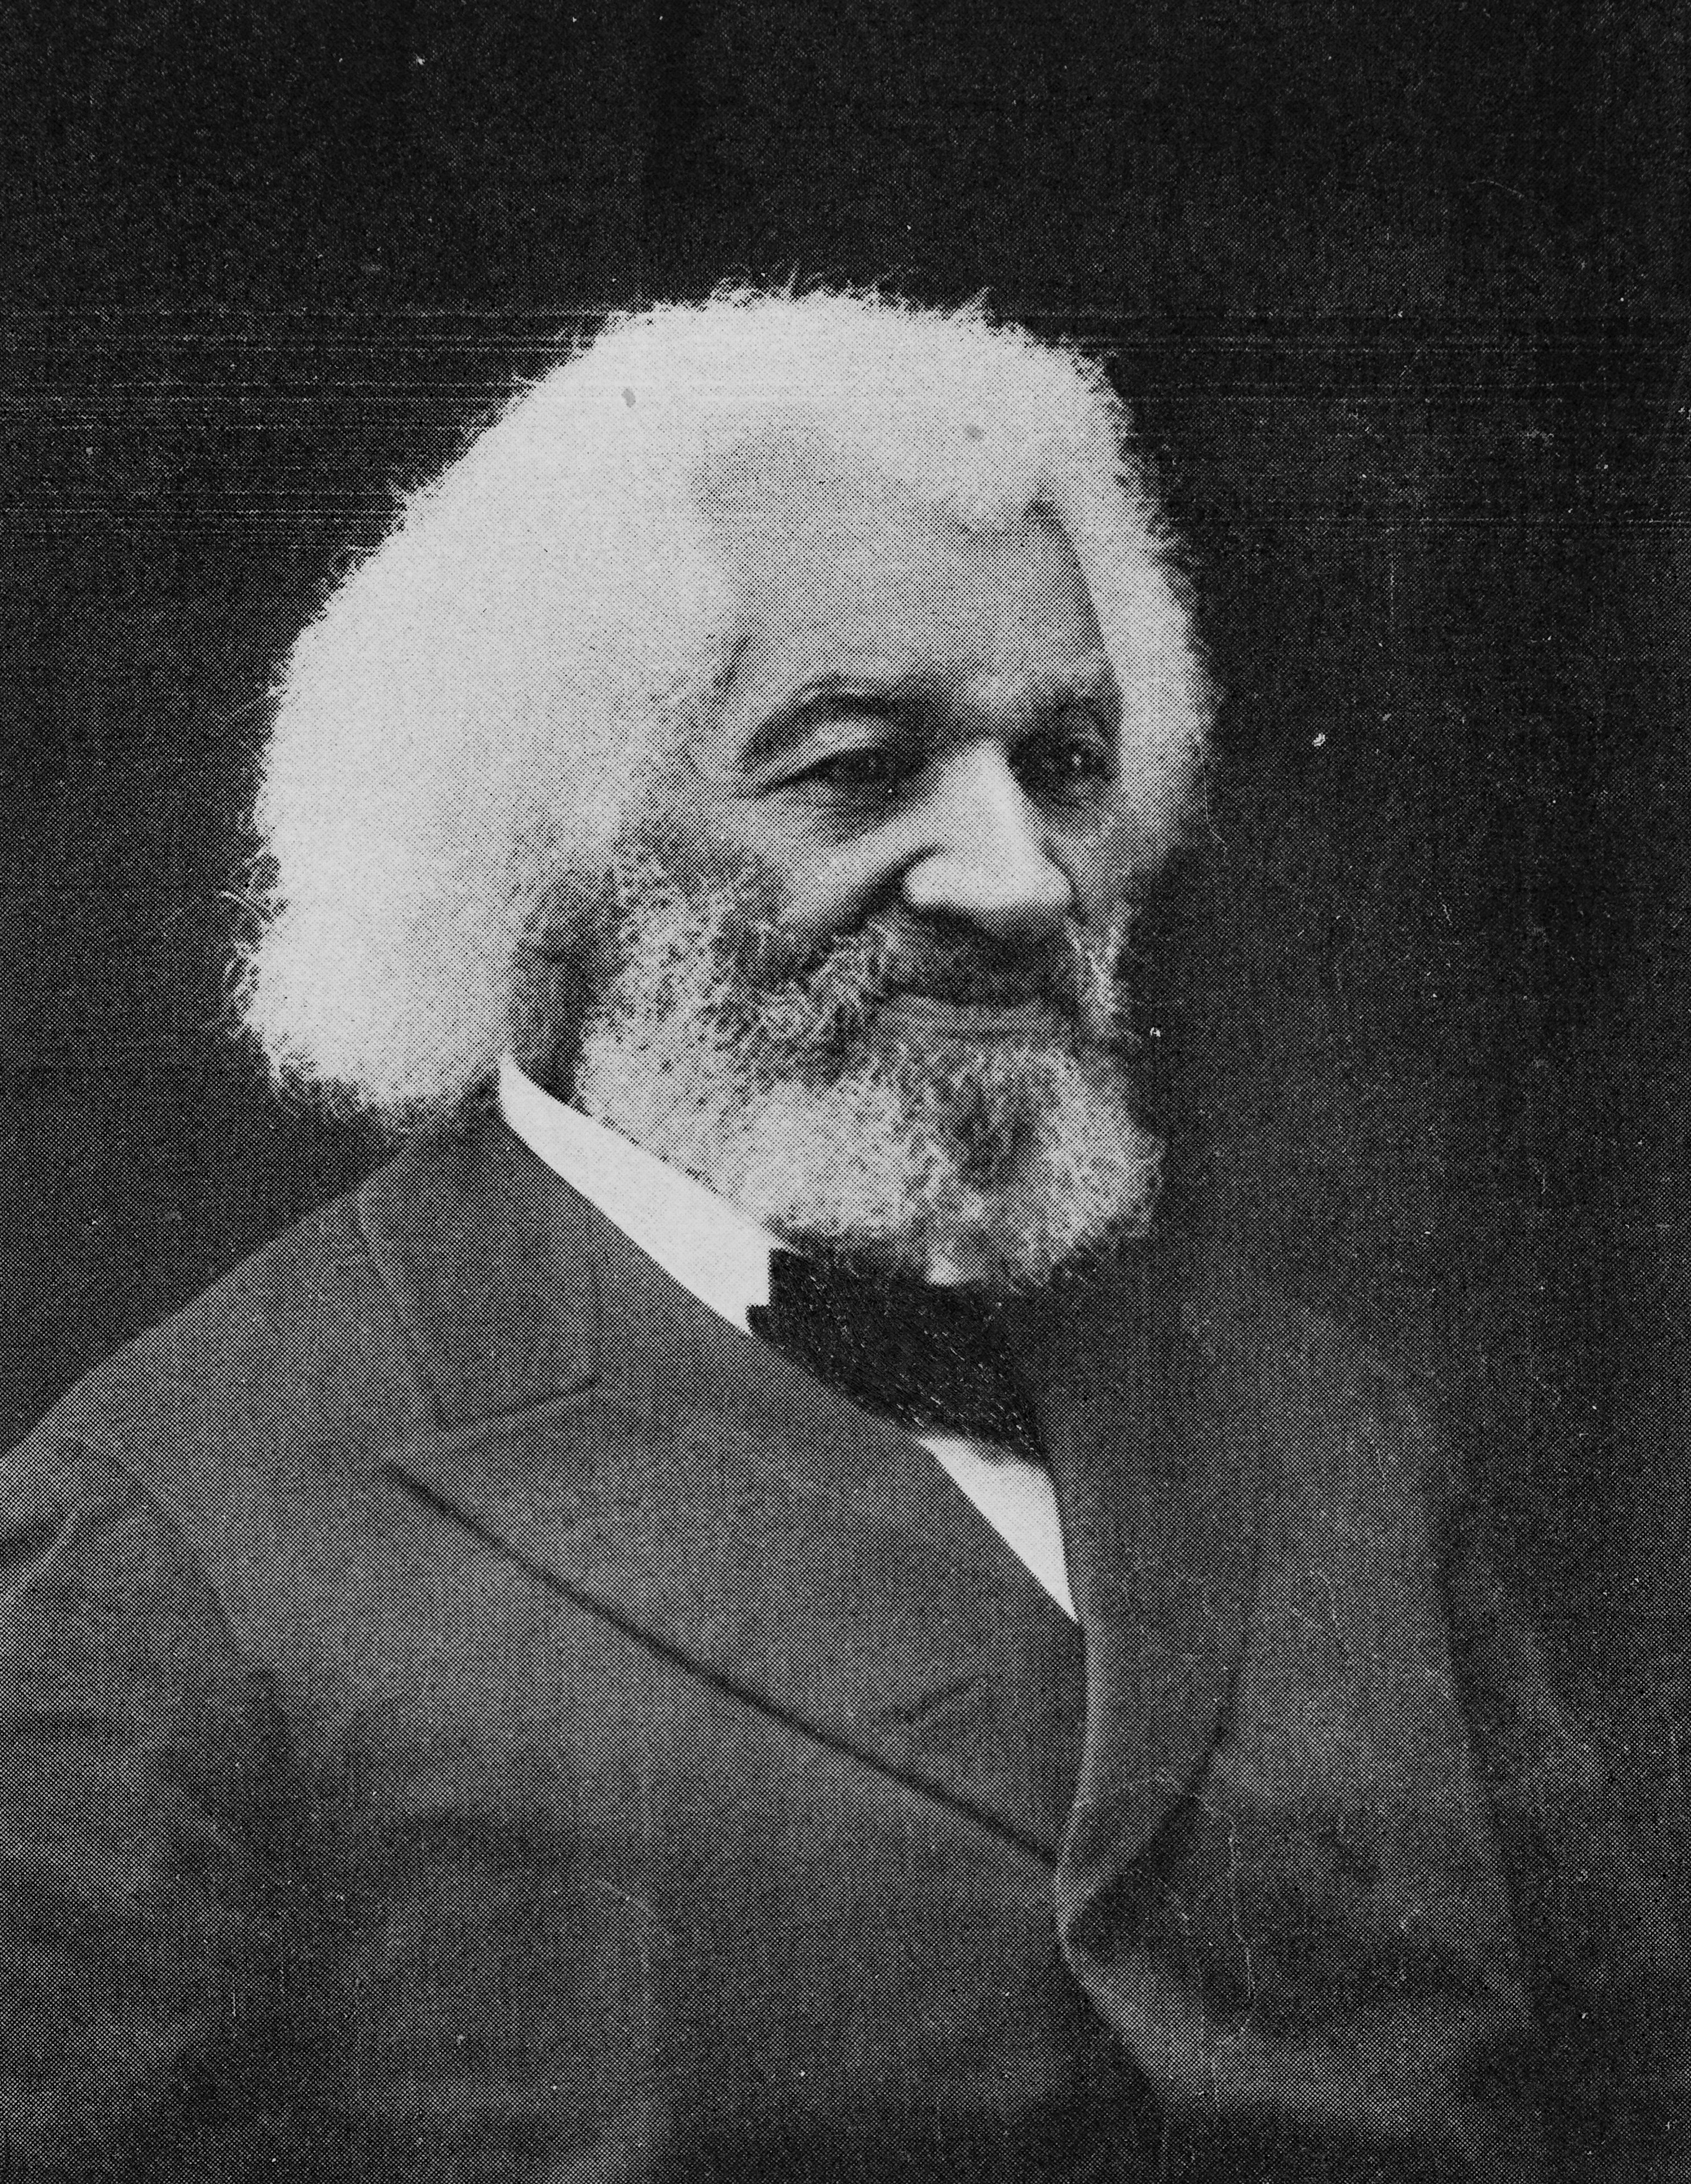 An portrait of Frederick Douglass in his later years.